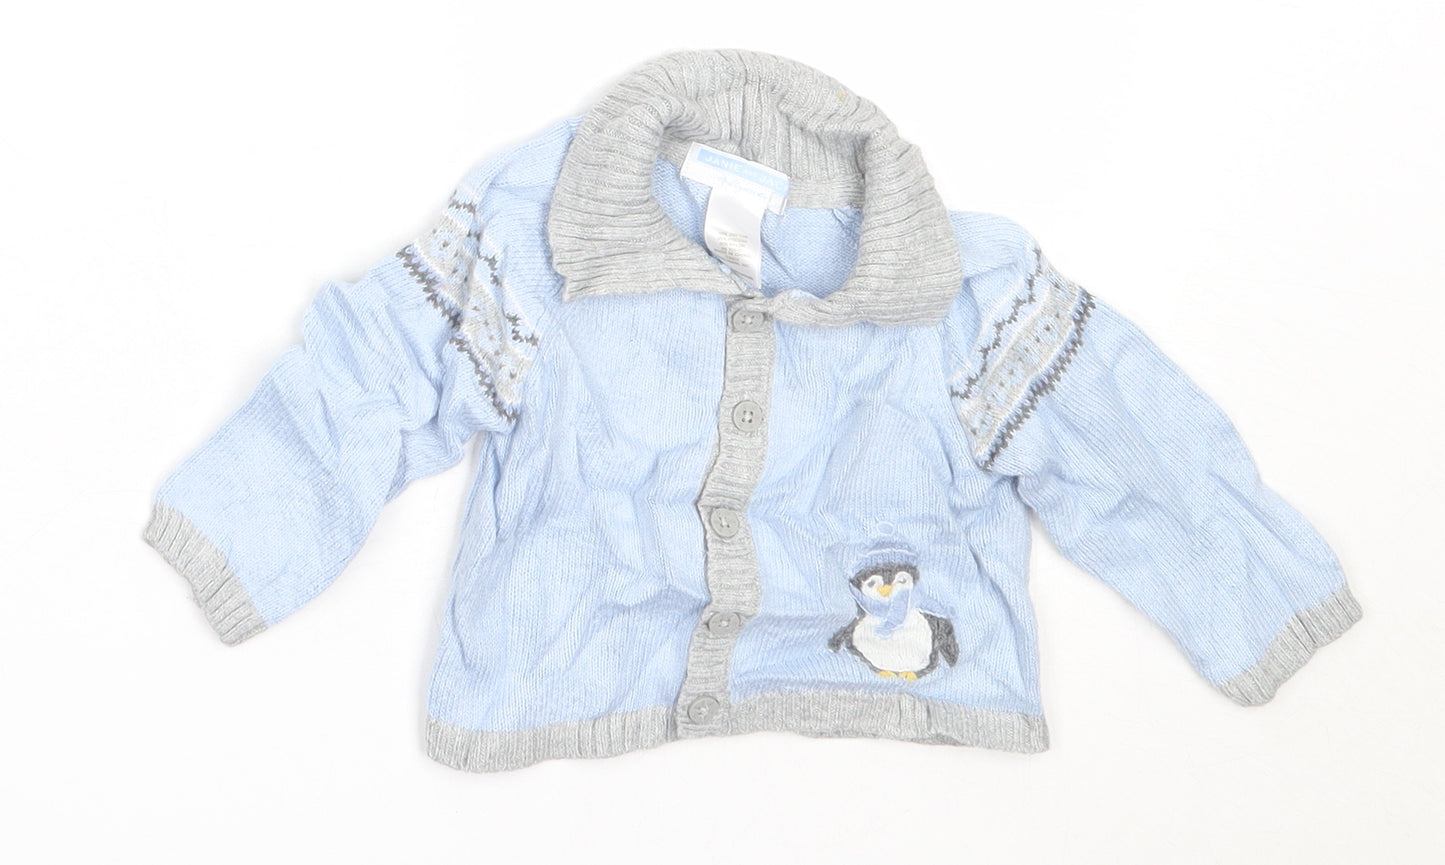 Janie and Jack Boys Blue  Cotton Cardigan Jumper Size 3-6 Months